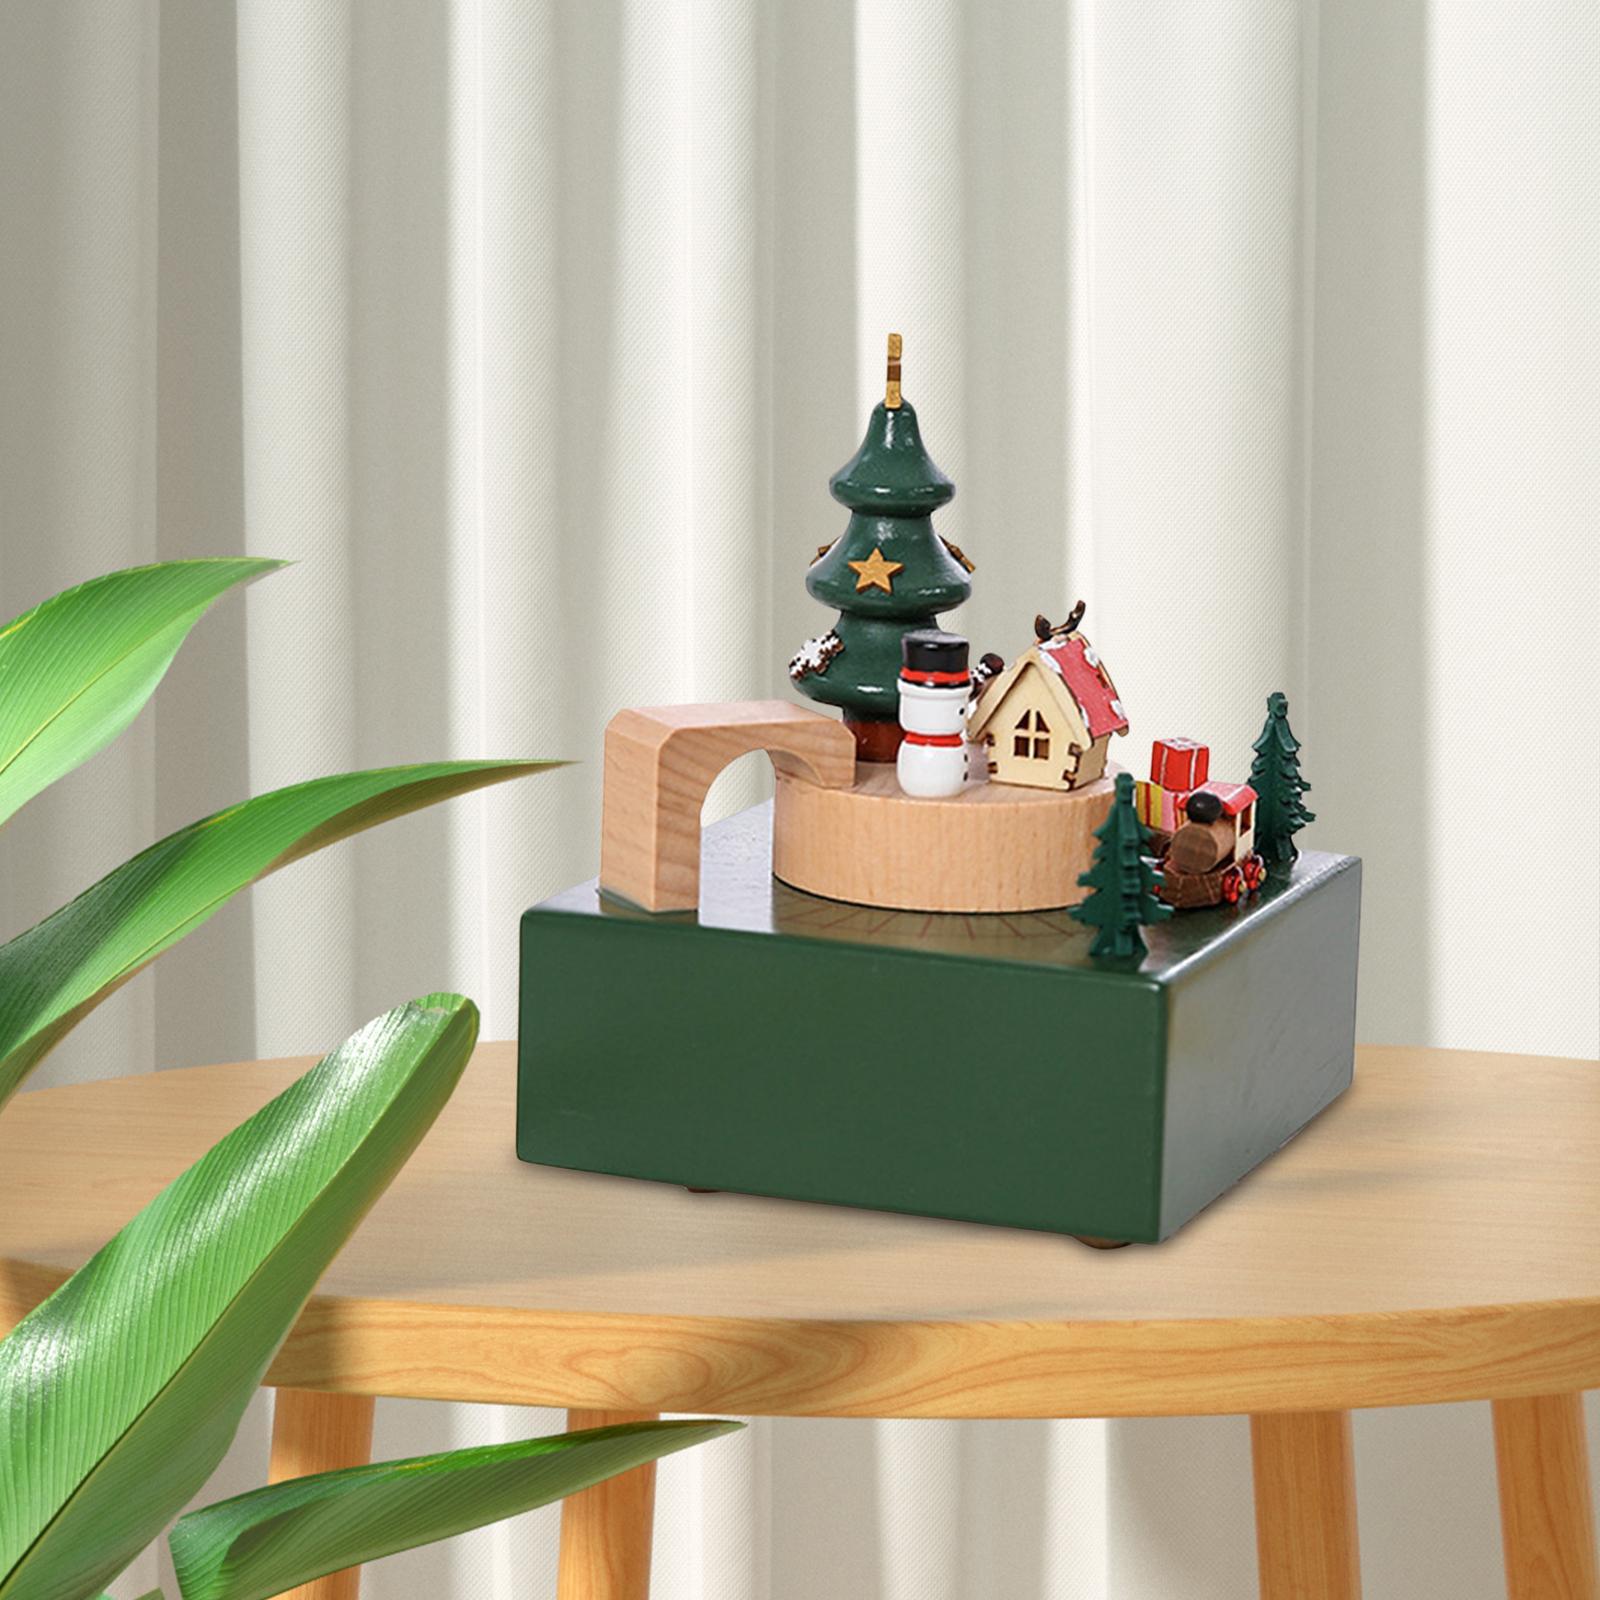 Portable Music Box Collectible with Songs Craft Ornament Decorative Christmas Ornament Rotating for Birthday Present Bookshelf Holiday Table